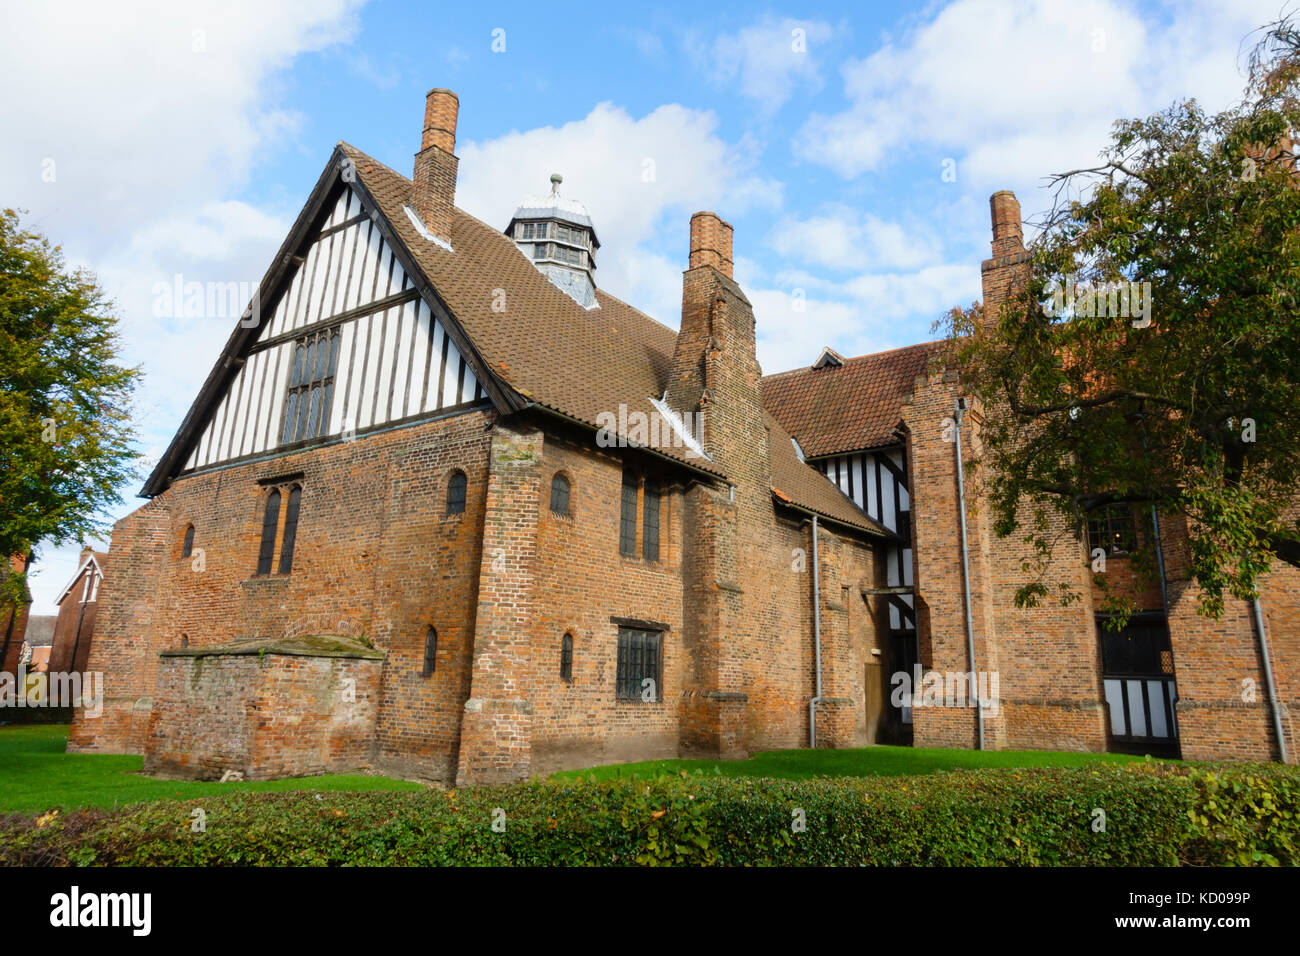 Medieval timber framed manor house, Gainsborough Old Hall, Lincolnshire, England. Stock Photo